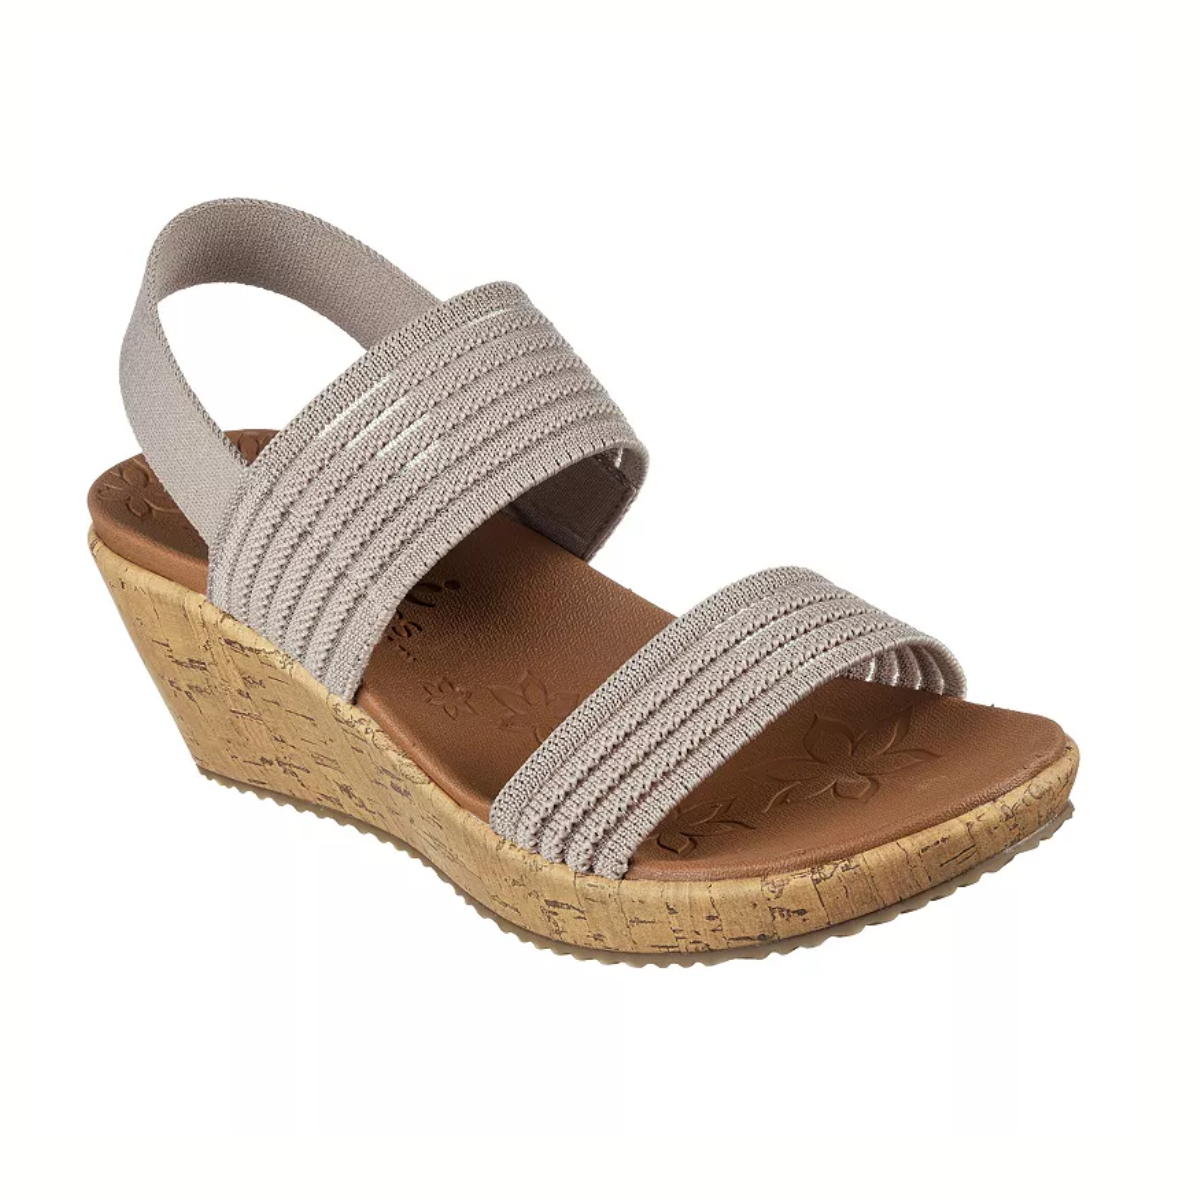 A SKECHERS USA INC Sheer Luck women's wedge sandal with elastic straps and a cork-like Luxe Foam sole.